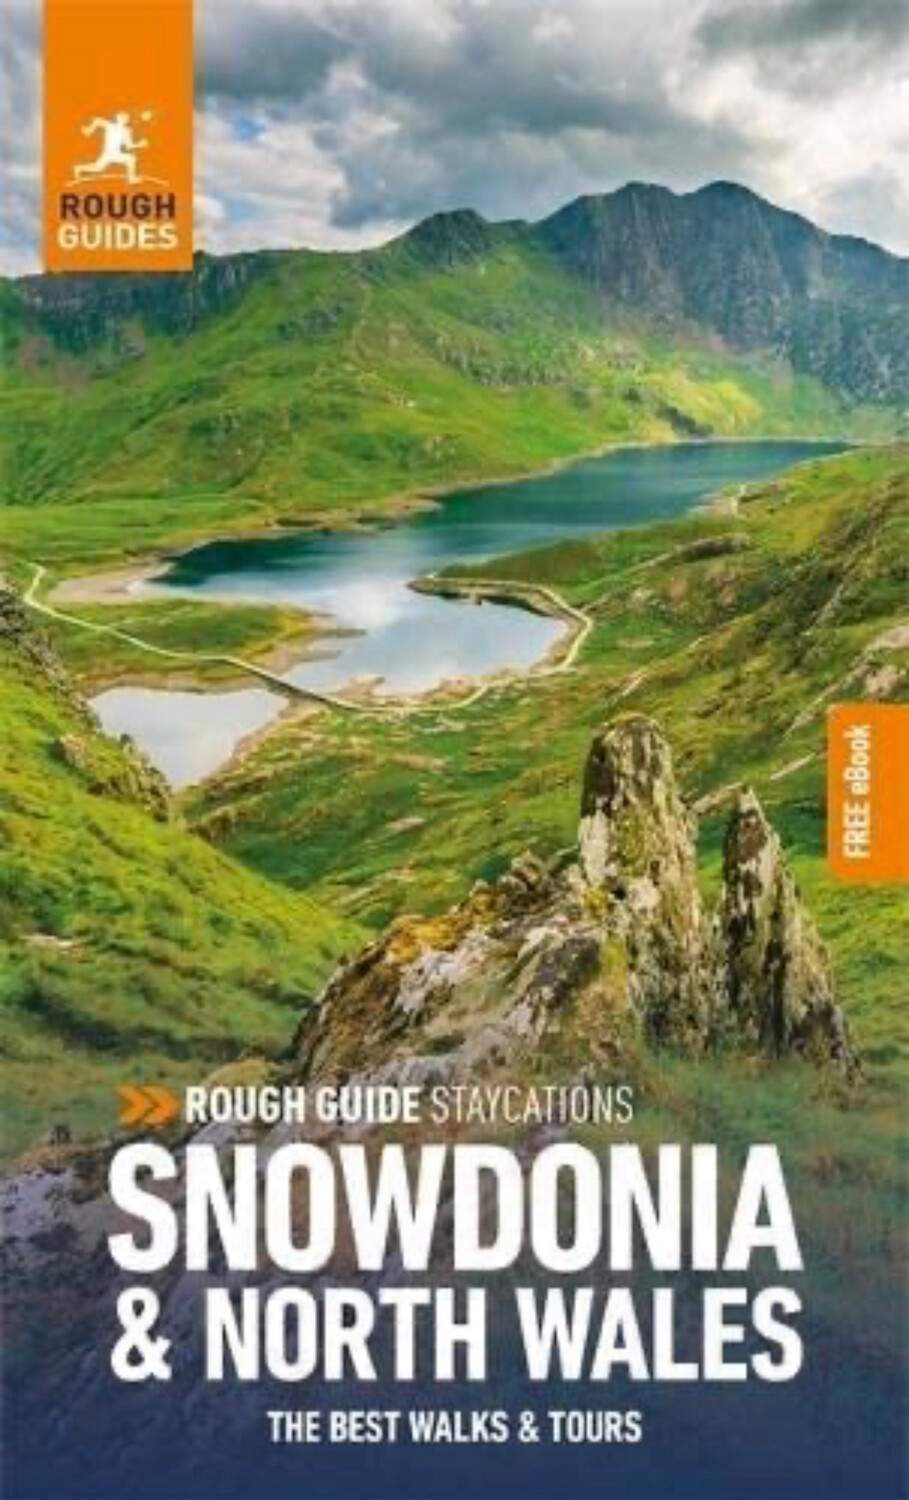 Rough Guide Staycations Snowdonia & North Wales